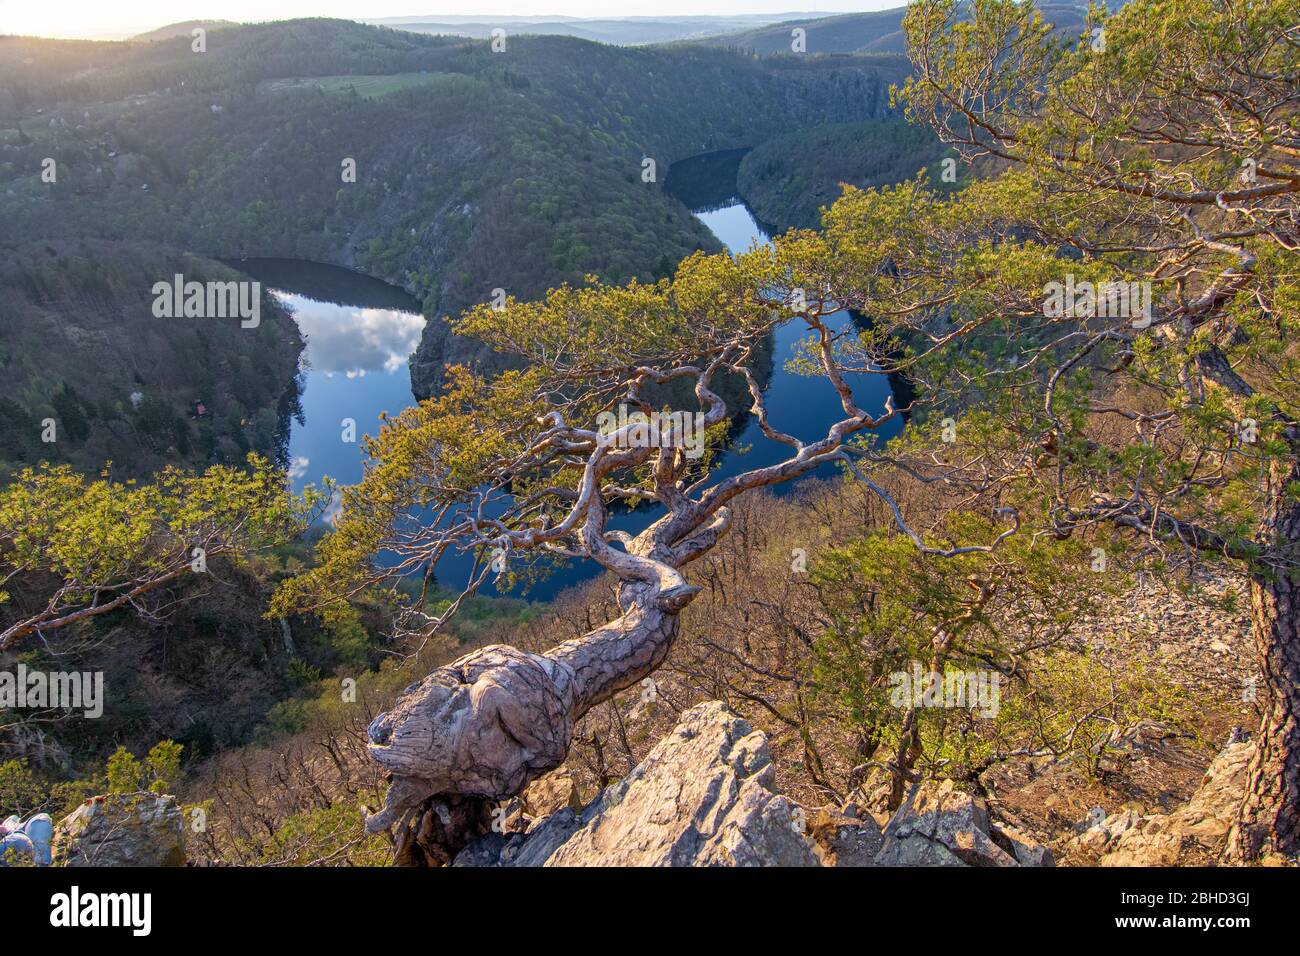 May Lookout in Czech Republic during sunset in Spring. Stock Photo